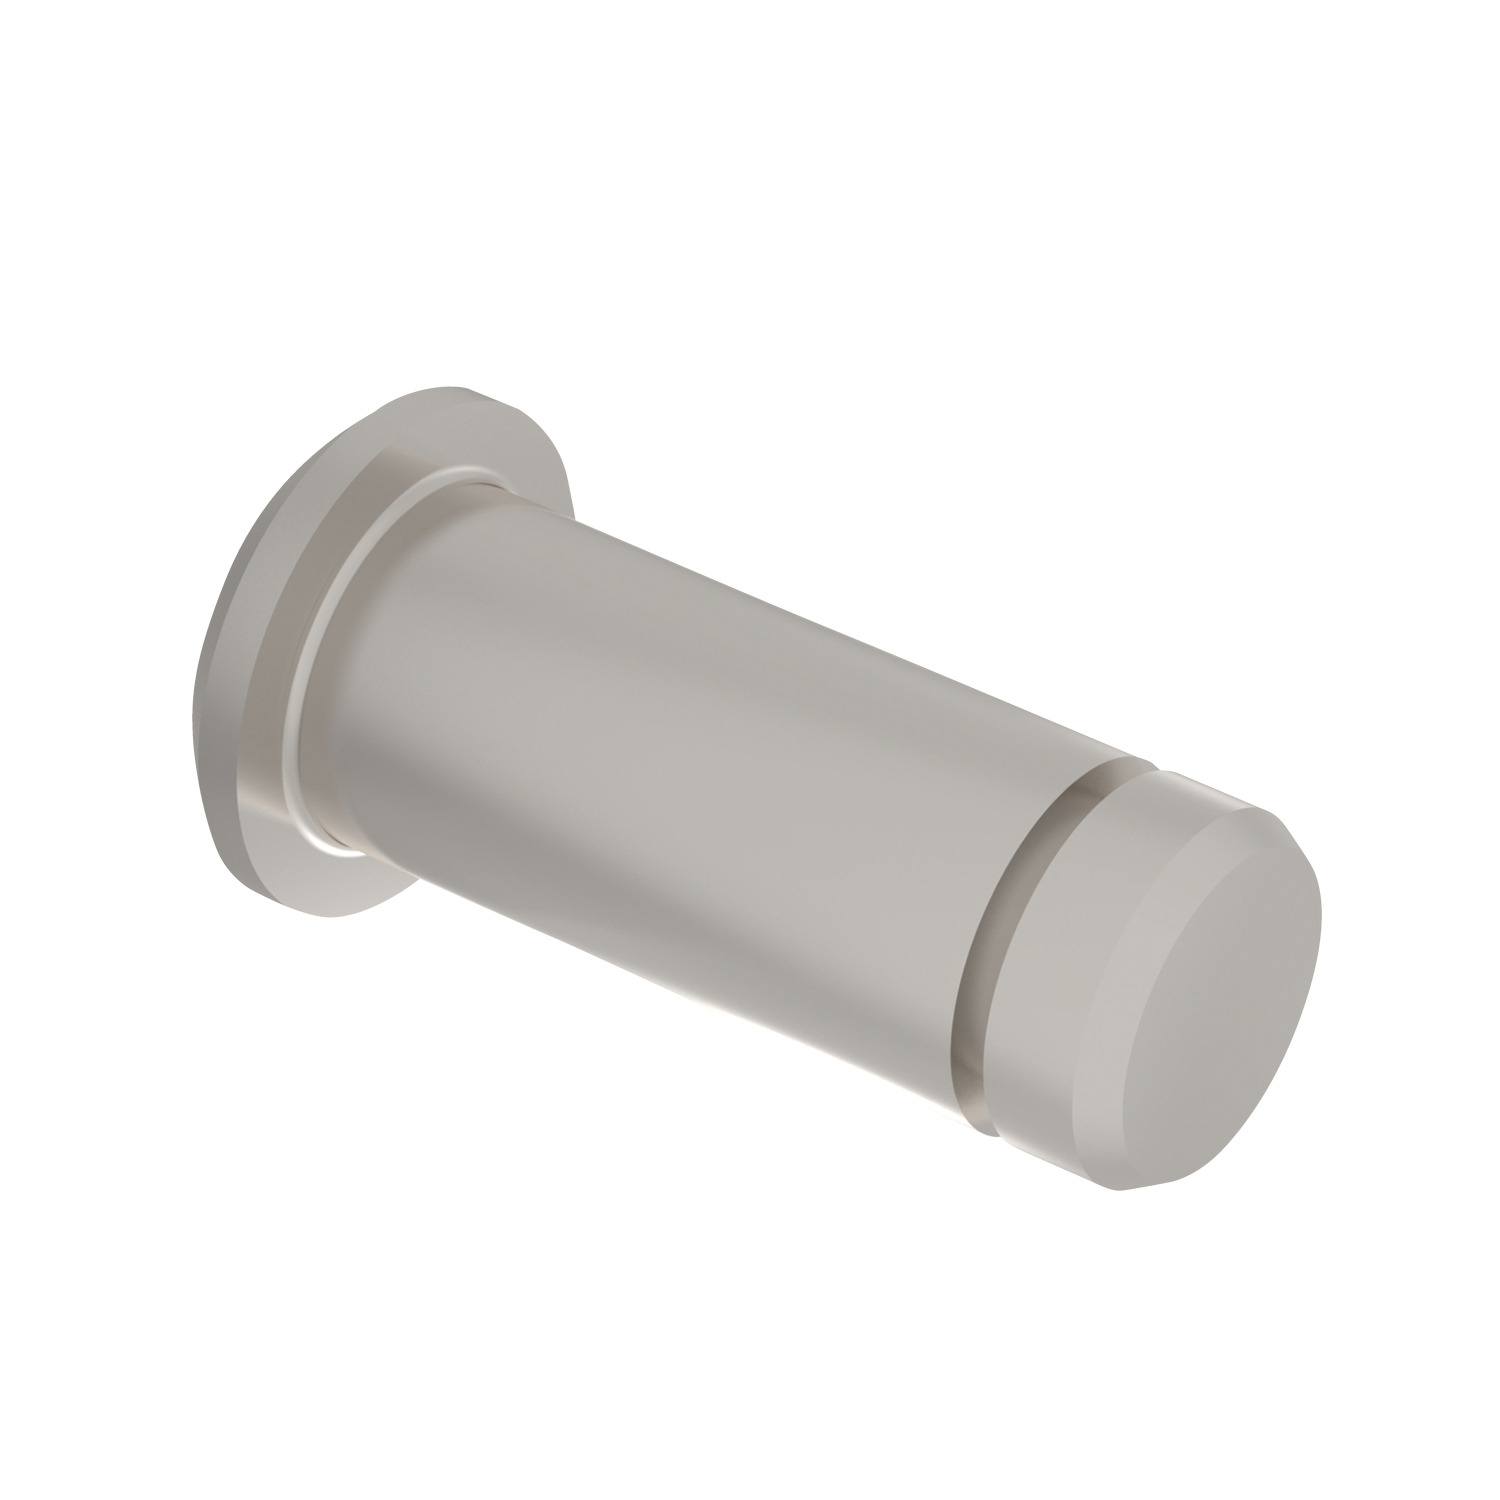 Clevis Pin Clevis pins designed for use with our clevis joints and R3440 safety fasteners.